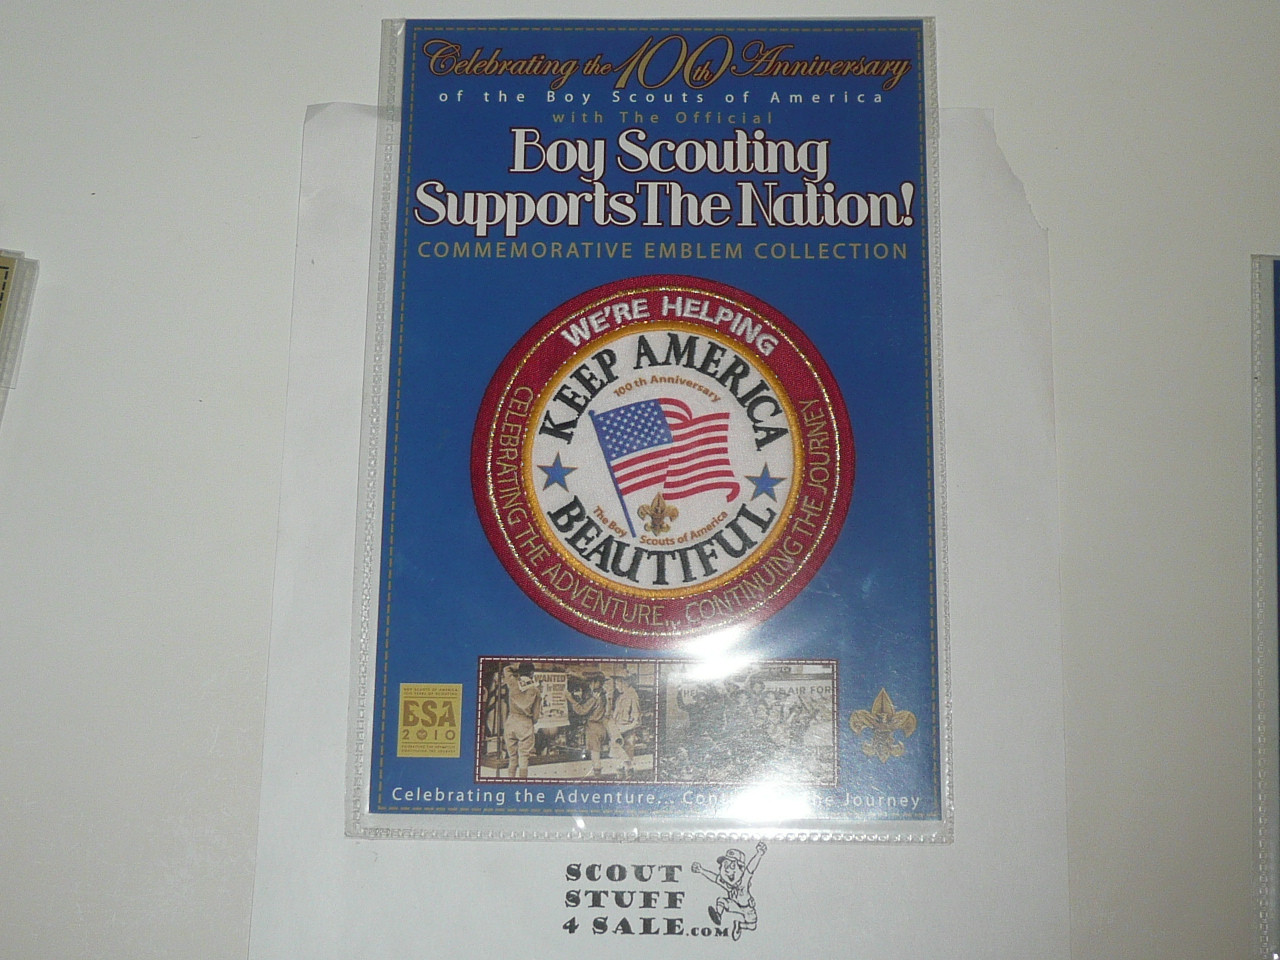 2010 100th Boy Scout Anniversary Commemorative Patch, Boy Scouting Supports the Nation Series, Keep America Beautiful